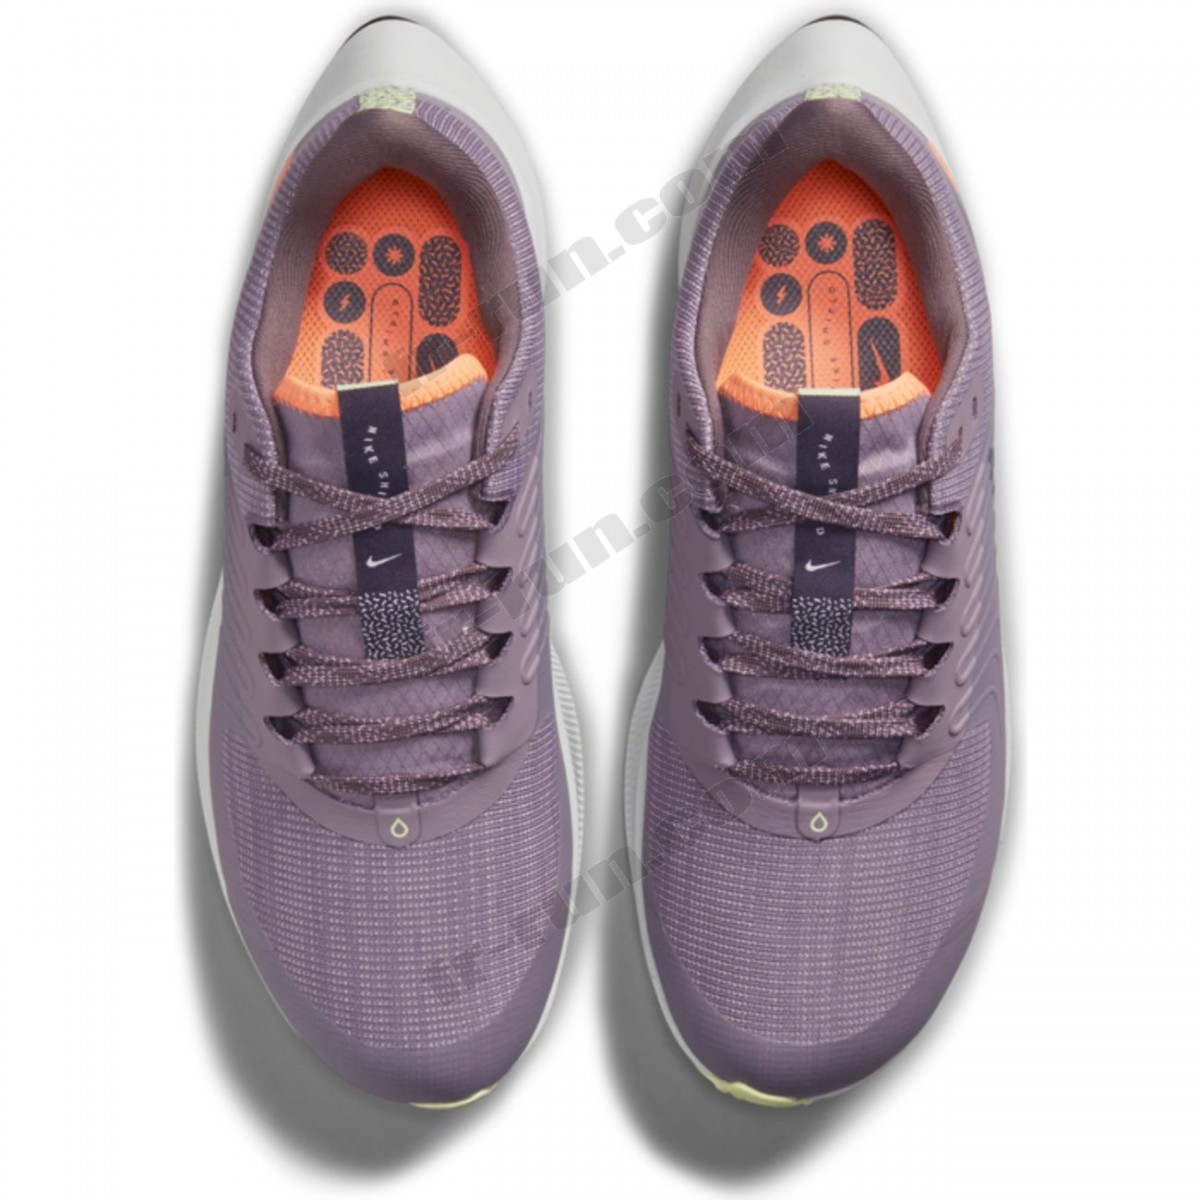 Nike/CHAUSSURES running femme NIKE W AIR ZOOM PEGASUS 38 SHIELD √ Nouveau style √ Soldes - -1